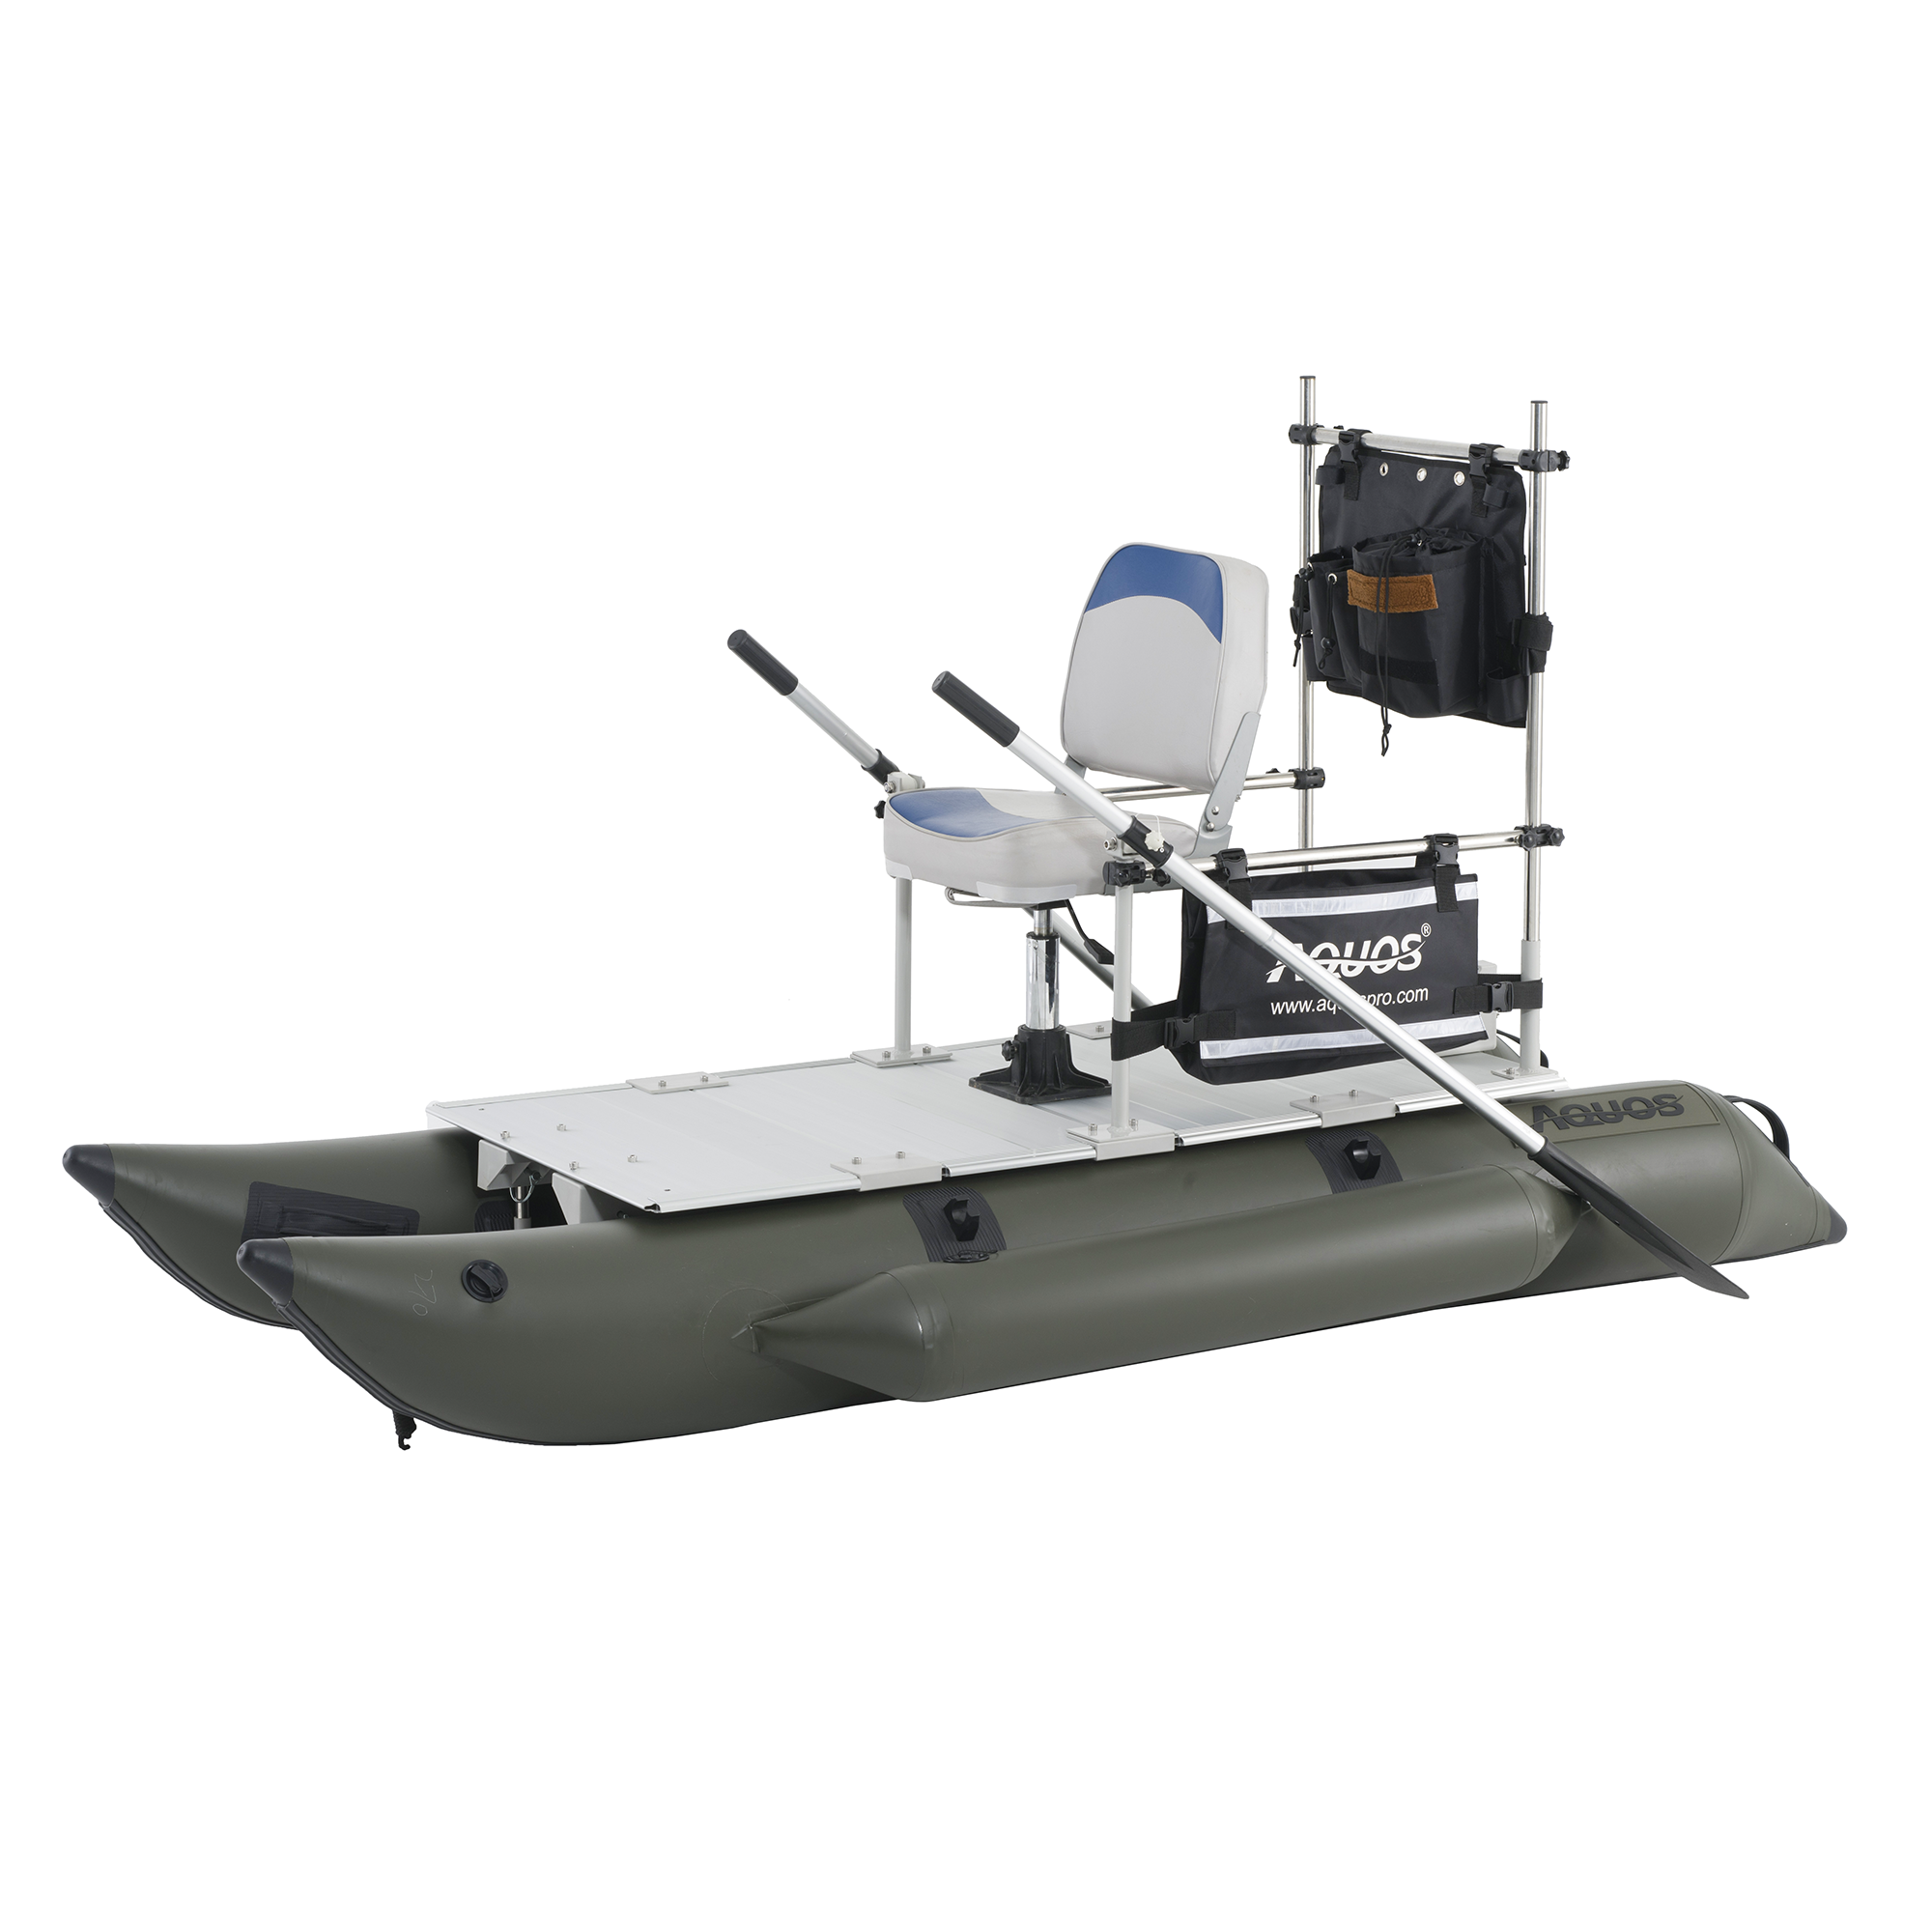 AQUOS 2021 New Backpack Series 8.8ft Inflatable Pontoon Boat with Haswing 12V 20lbs Transom Hand Control Trolling Motor